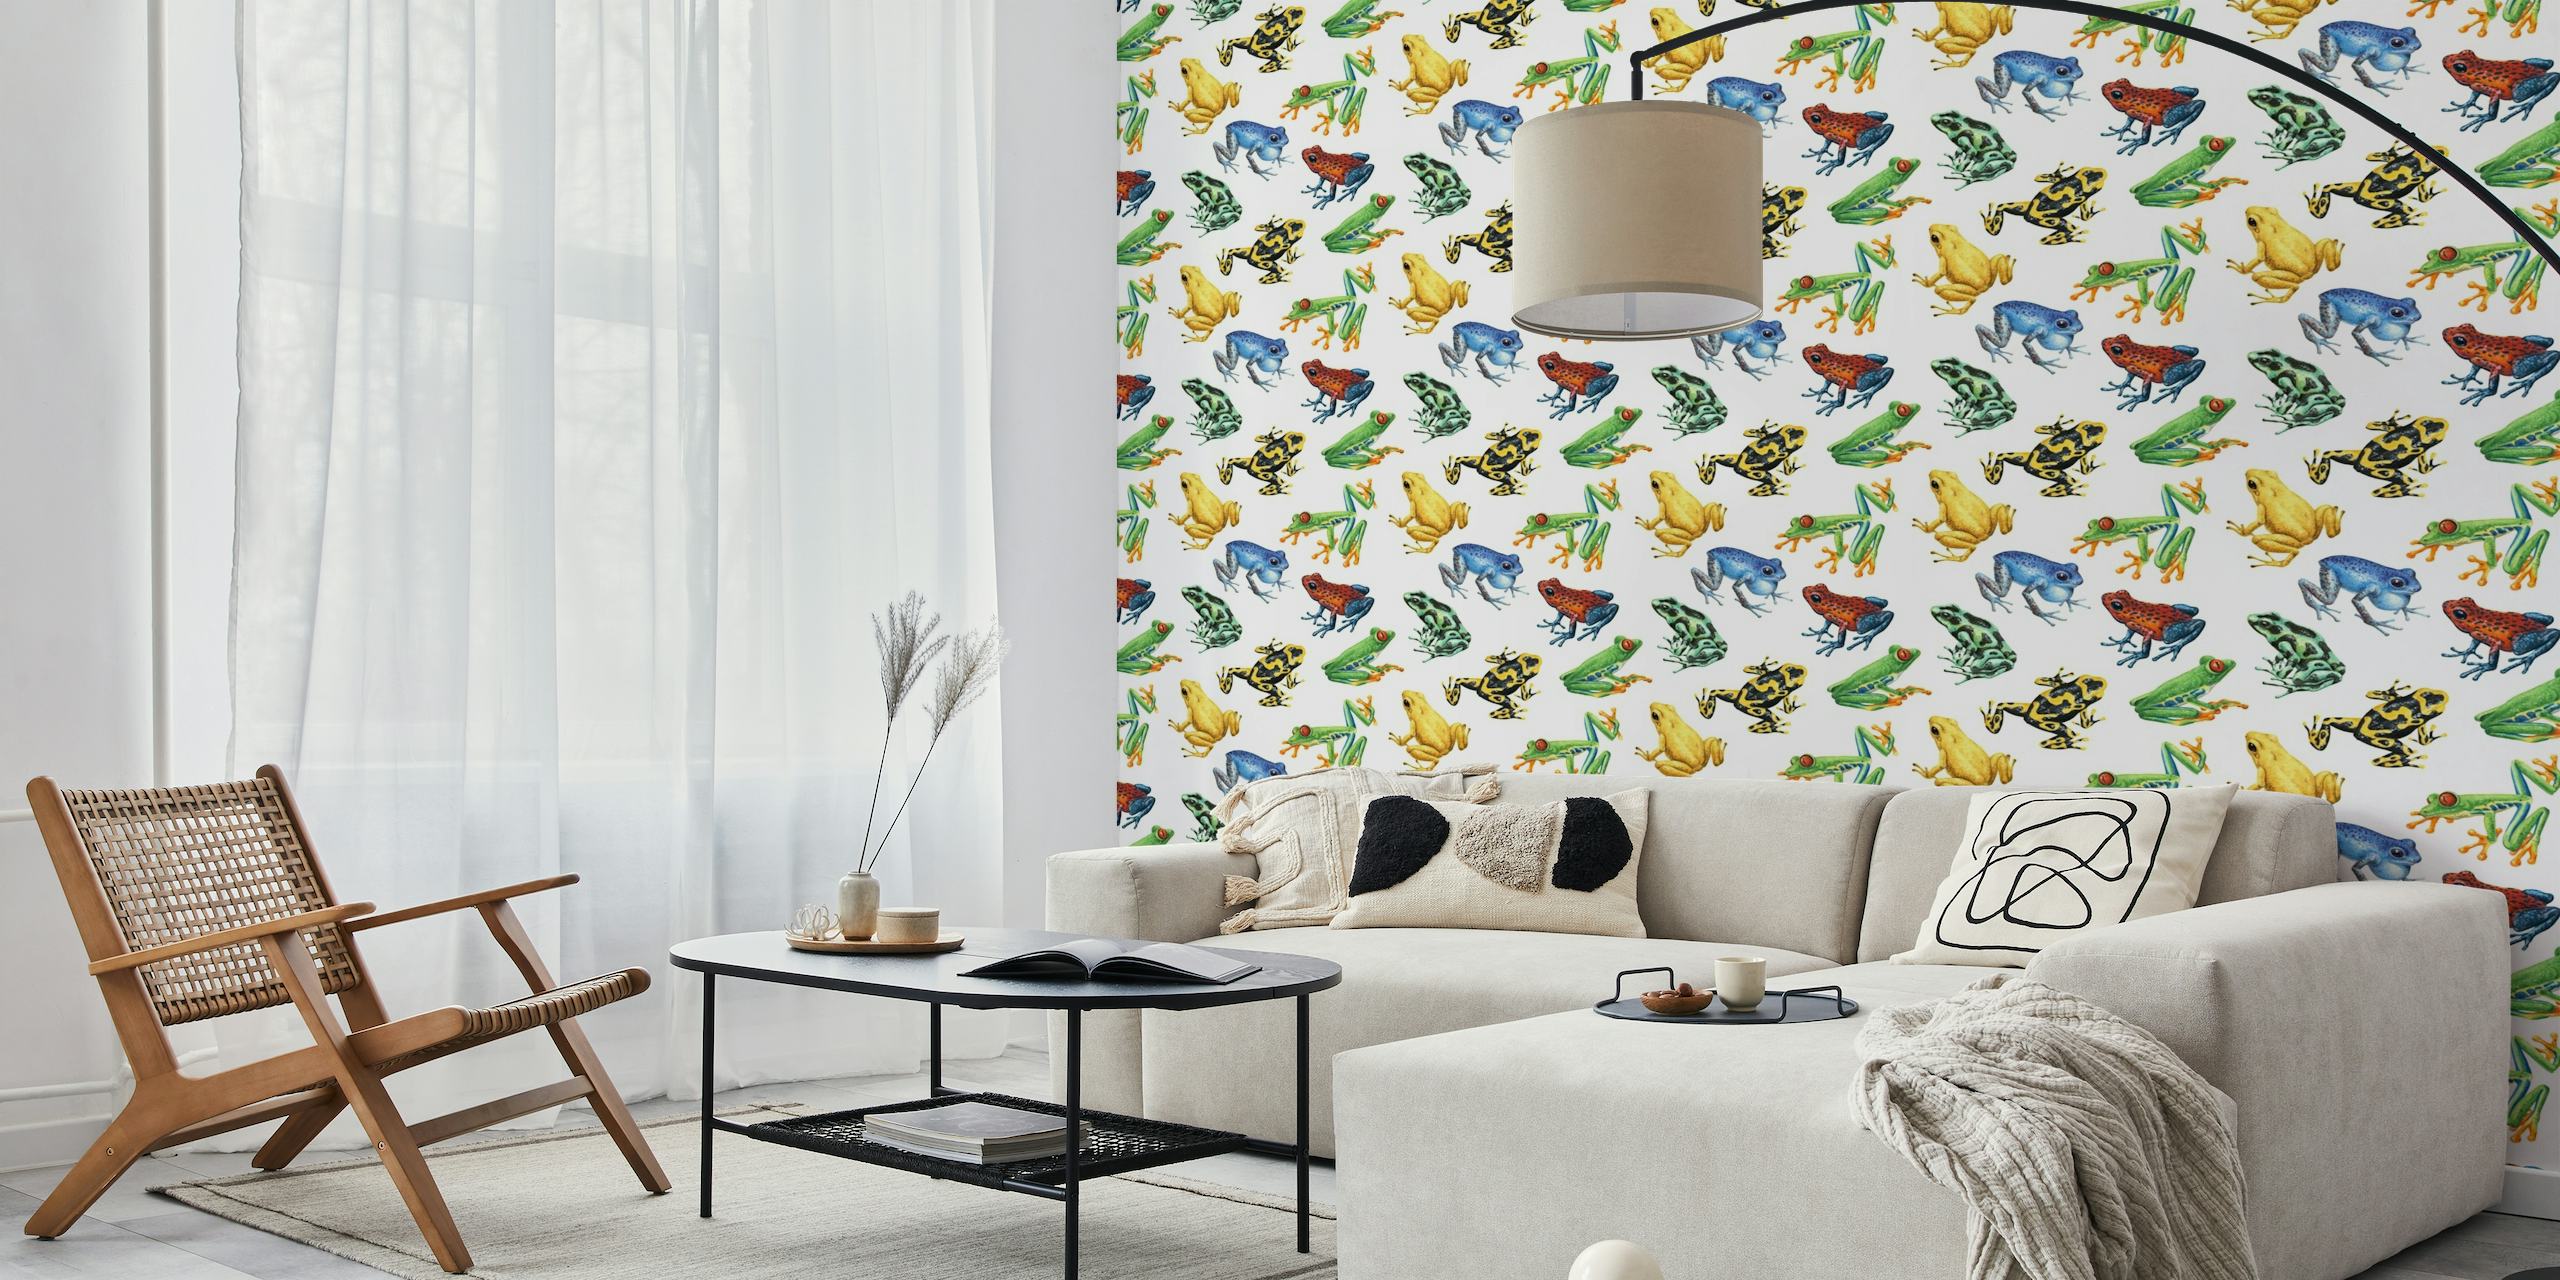 Frogs on natural white wallpaper